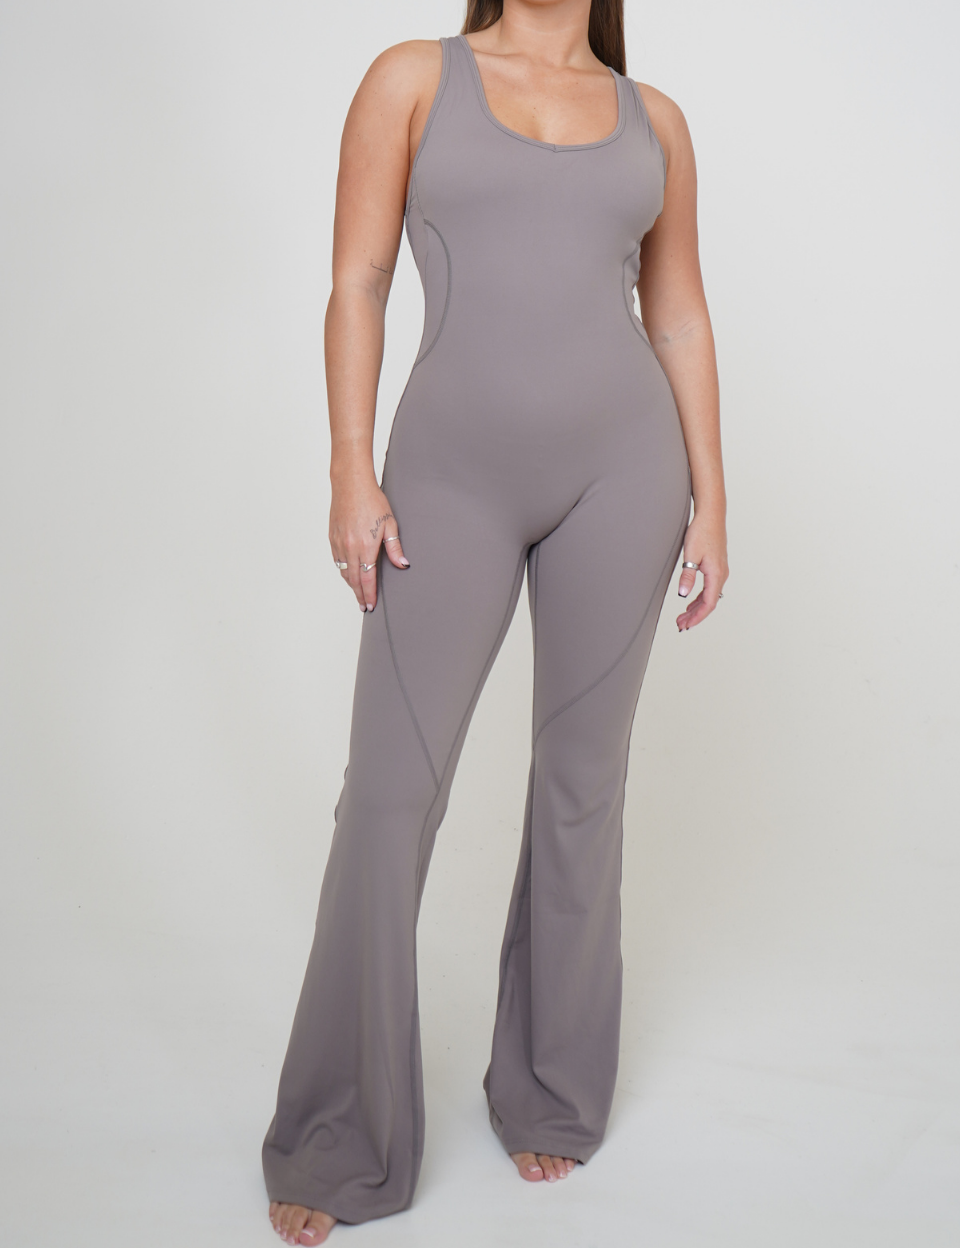 Go.G.G OnTheMove Soft Touch Fitness Open Back Flared Yoga Jumpsuit